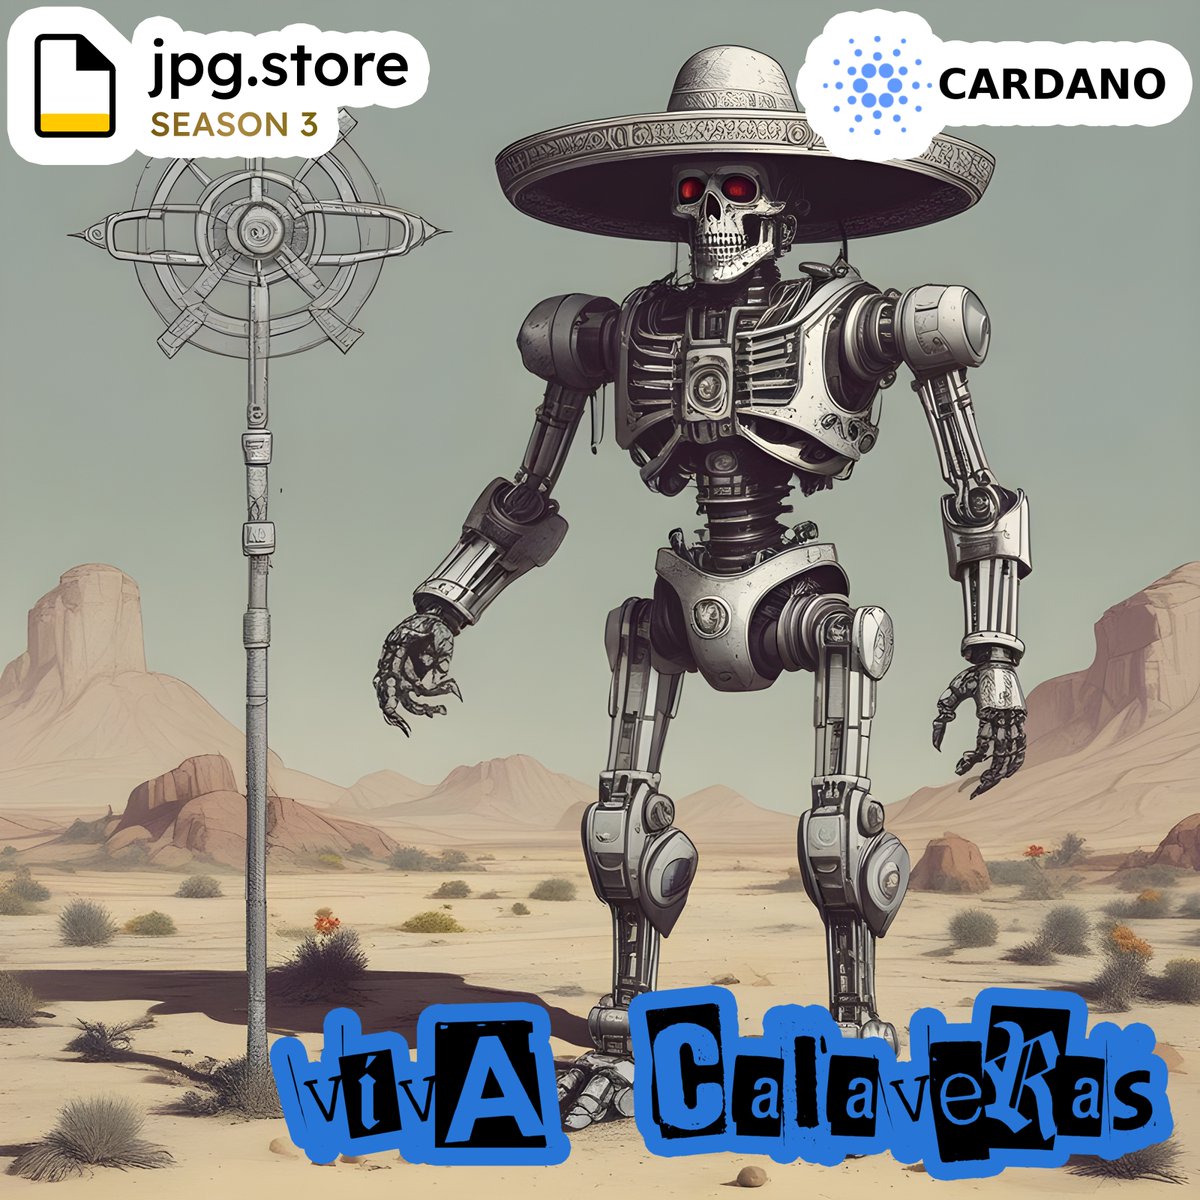 Viva Calaveras on Cardano via jpg.store ! These NFTs can be redeemed for a signed 3D printed K-SCOPES® Trading Card.

Zether
jpg.store/listing/226770…

#cardano #ADA #CardanoNFT #CardanoCommunity #NFT #vivacalaveras #calaveras #kscopes #tradingcards #3dprinting #AI